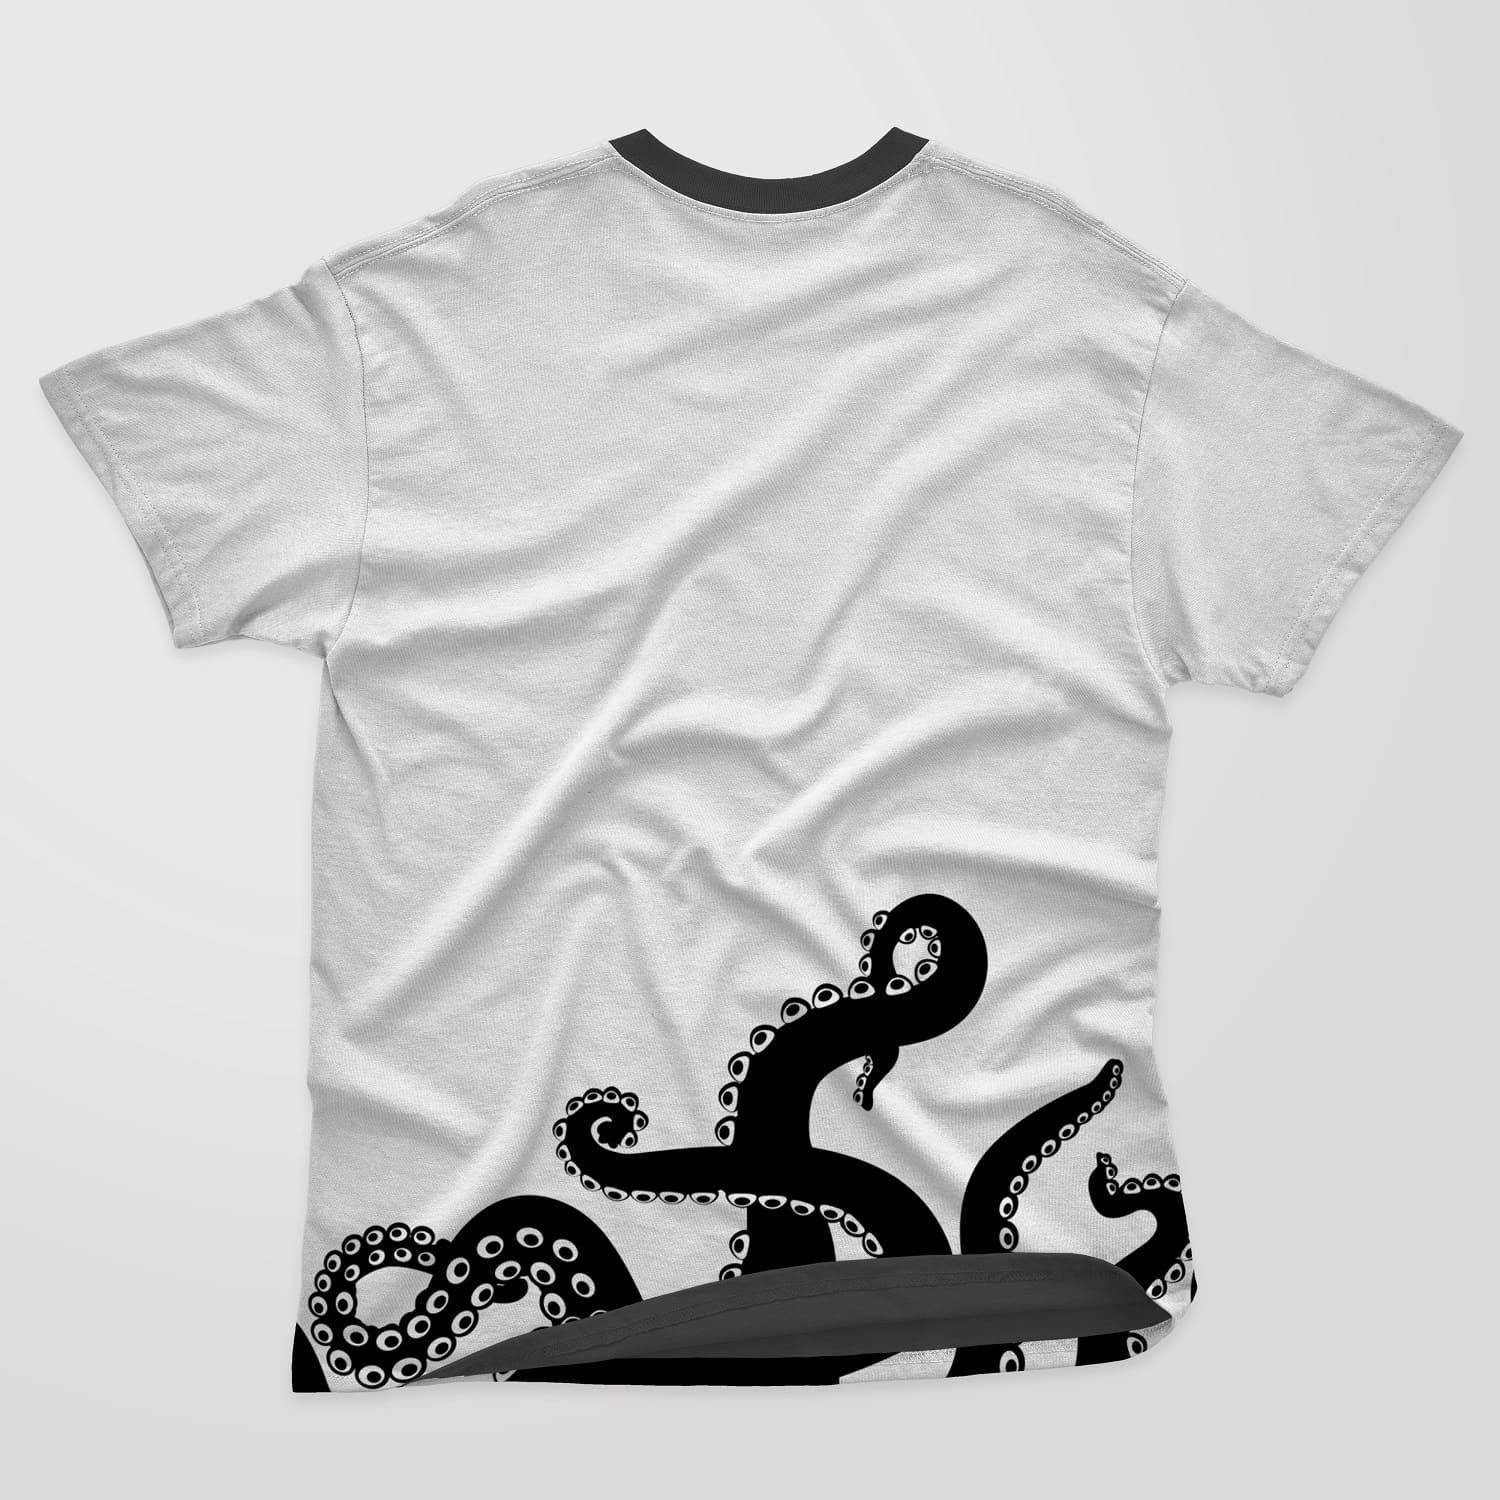 Five black octopus tentacles on a white t-shirt.